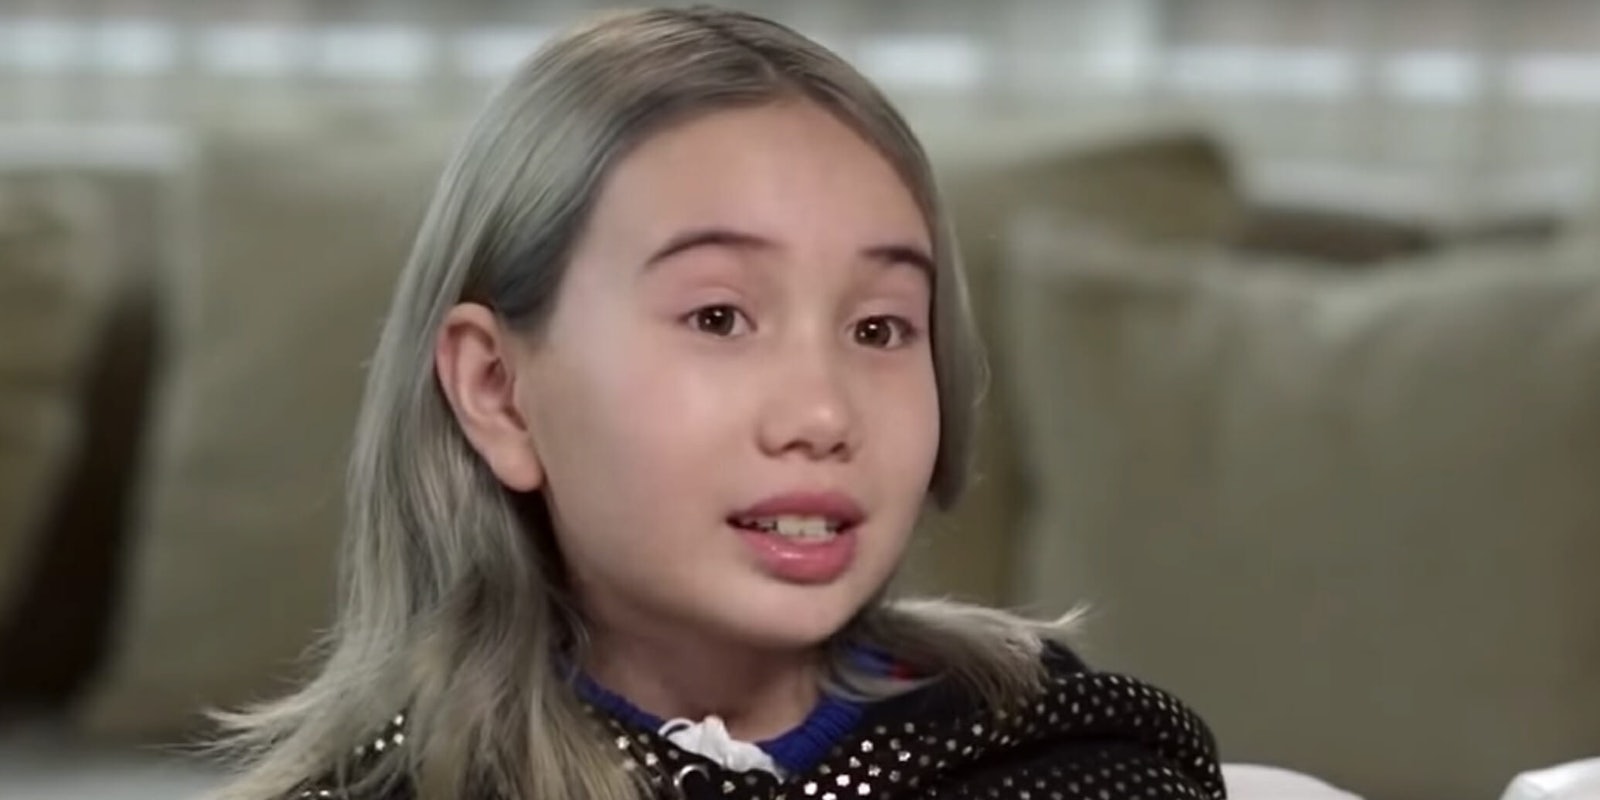 Lil Tay's Instagram and YouTube accounts have gone dark.